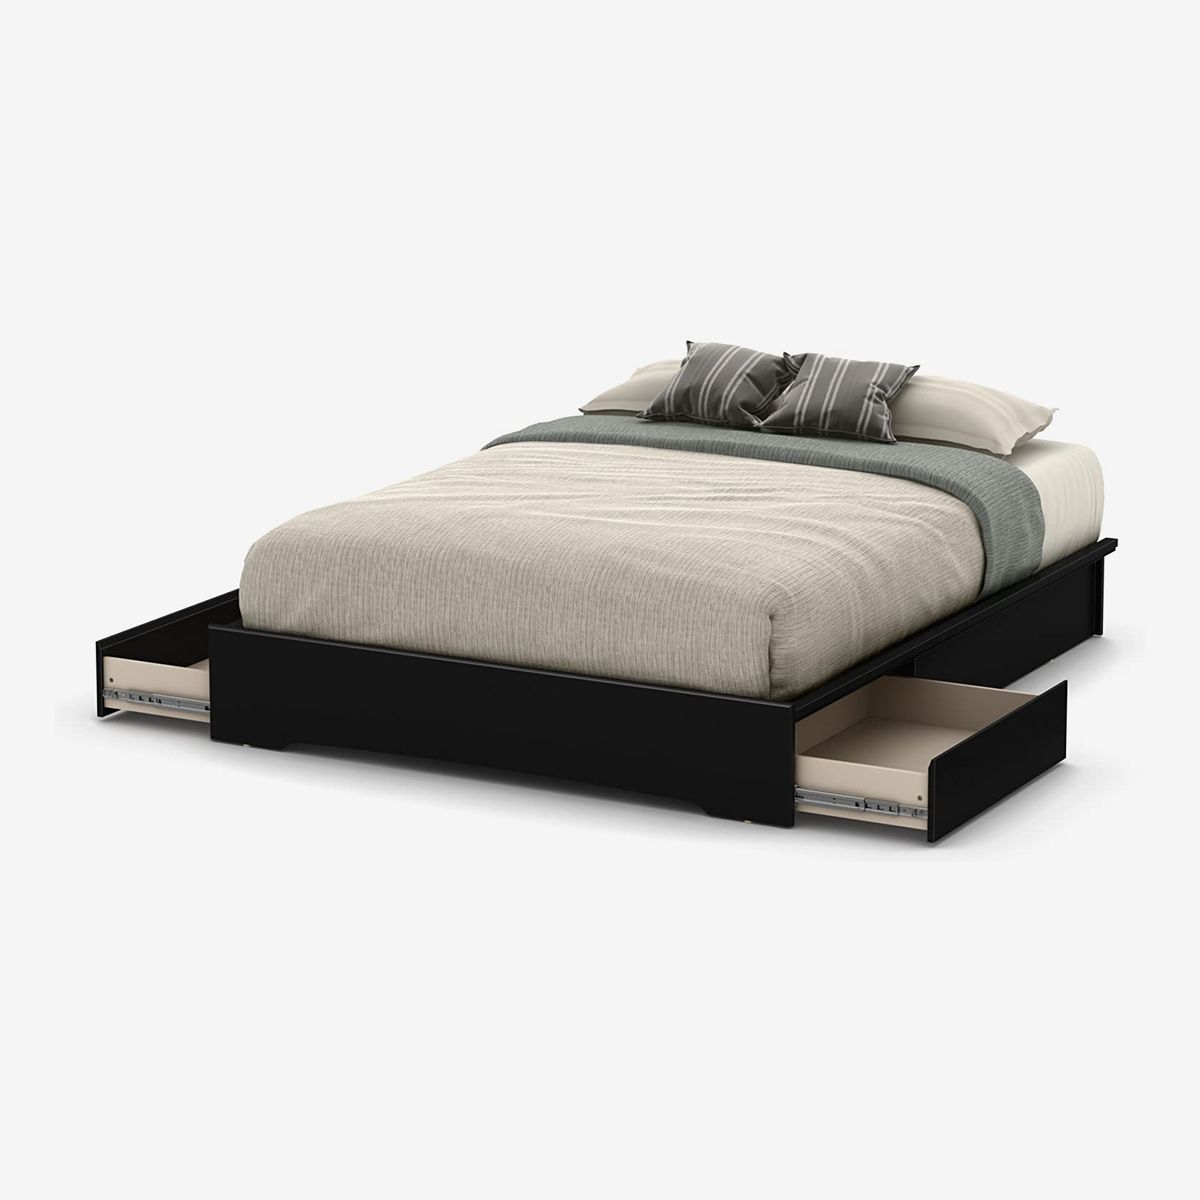 Modern Platform Beds With Storage, King Size Bed Frame With Storage Drawers Underneath